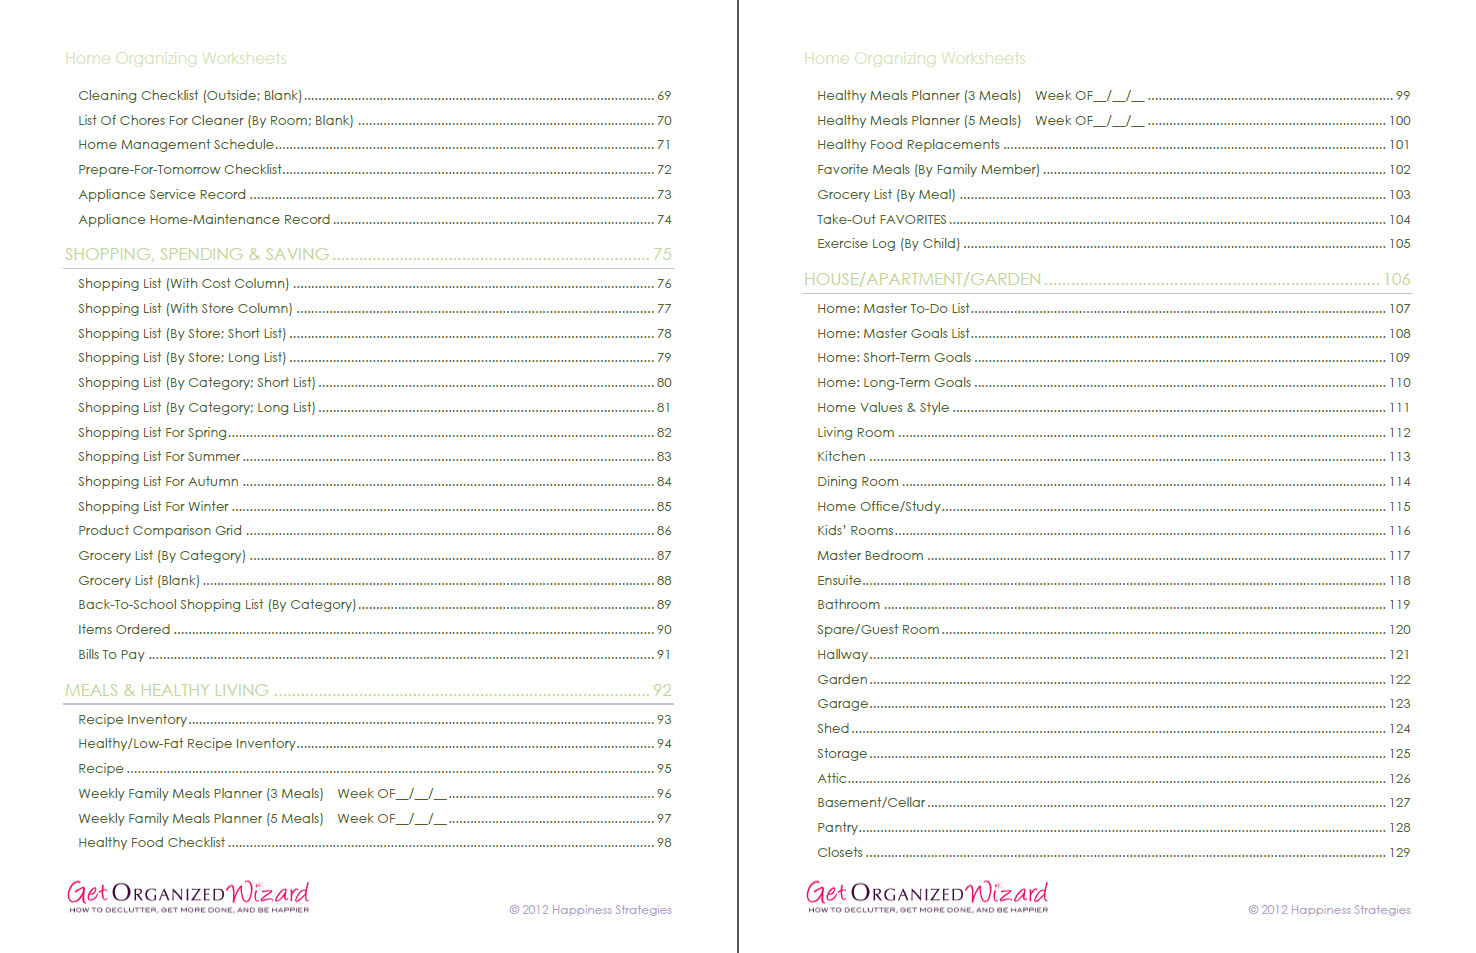 home-organization-worksheets-household-to-do-lists